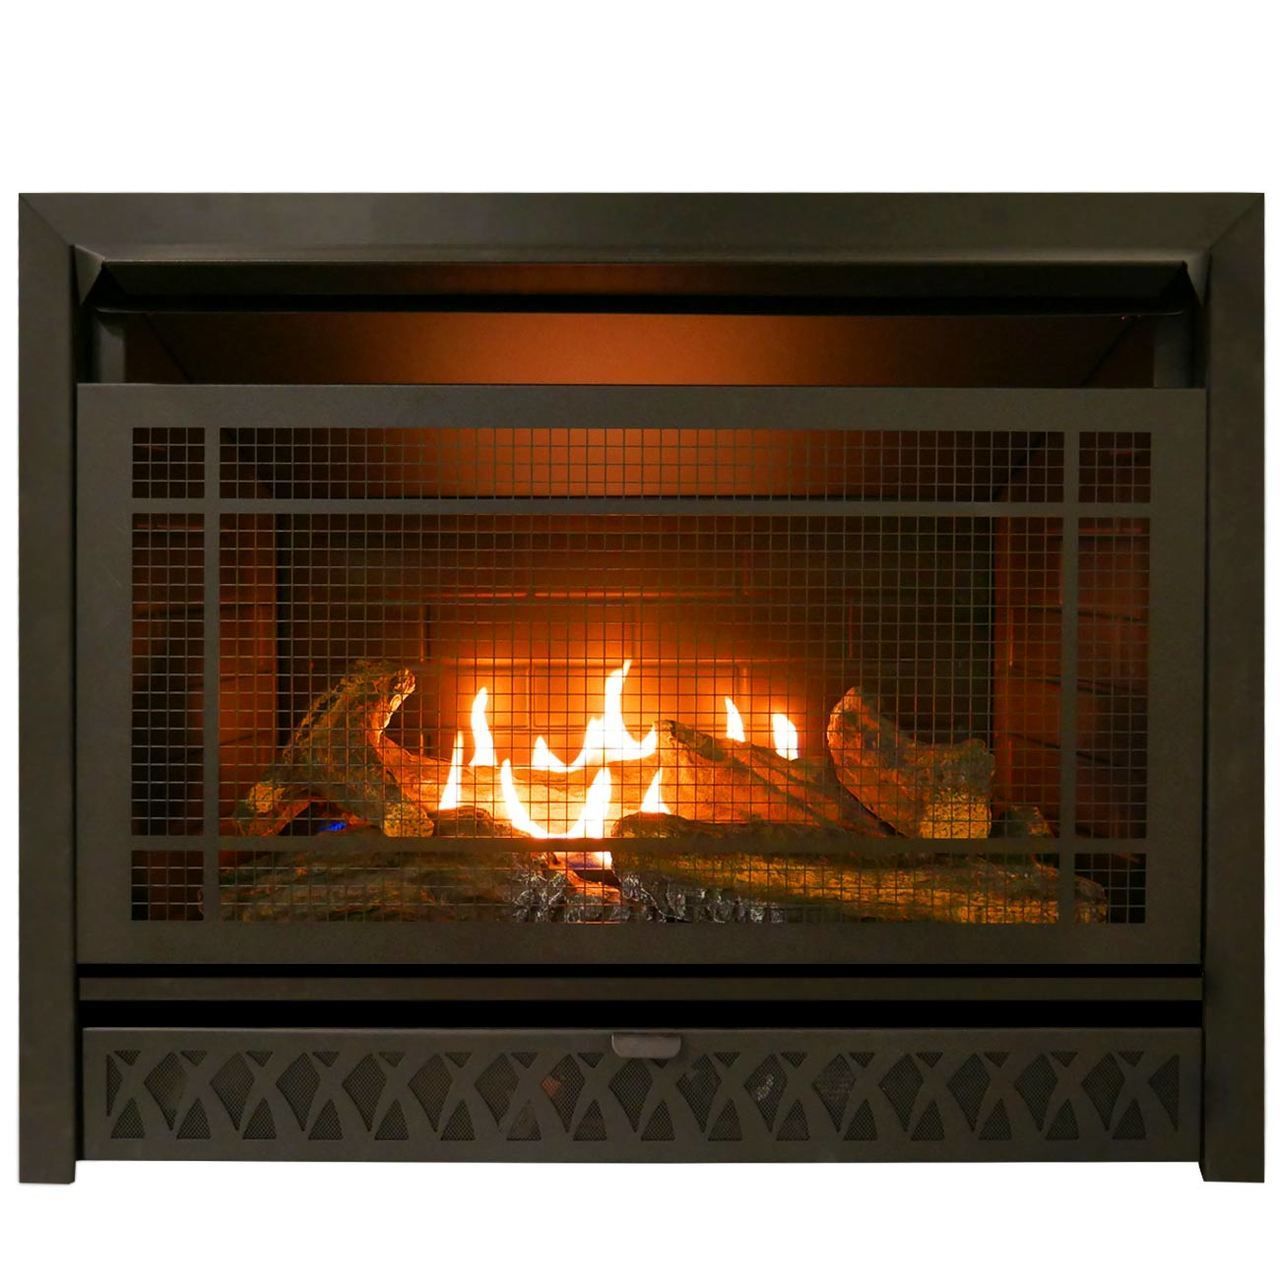 Fireboxes for Wood Burning Fireplaces Lovely Pro Fireplaces 29 In Ventless Dual Fuel Firebox Insert